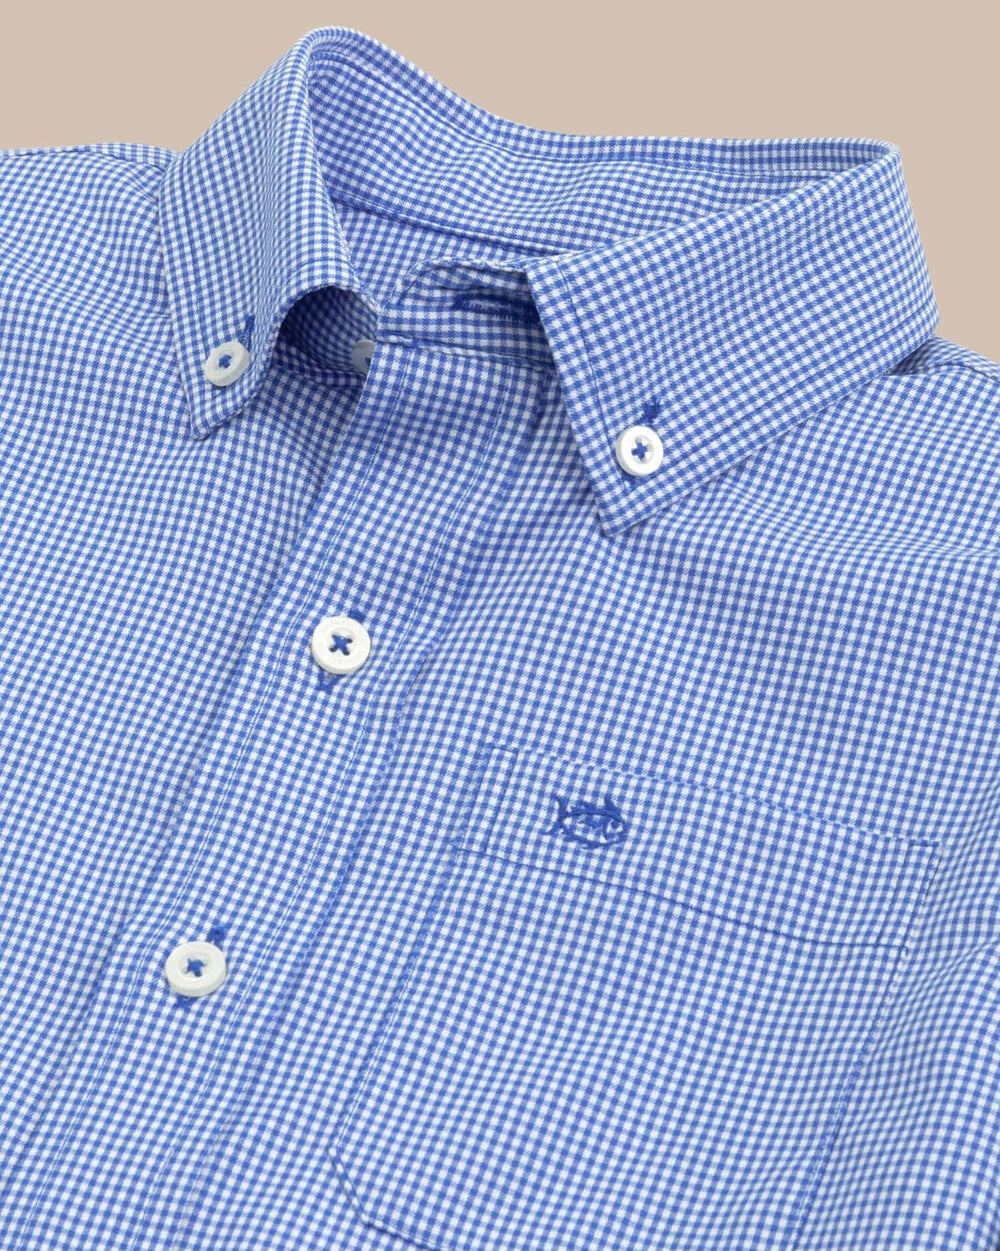 The detail view of the Southern Tide Boys mini gingham intercoastal buttn down shirt by Southern Tide - Cobalt Blue